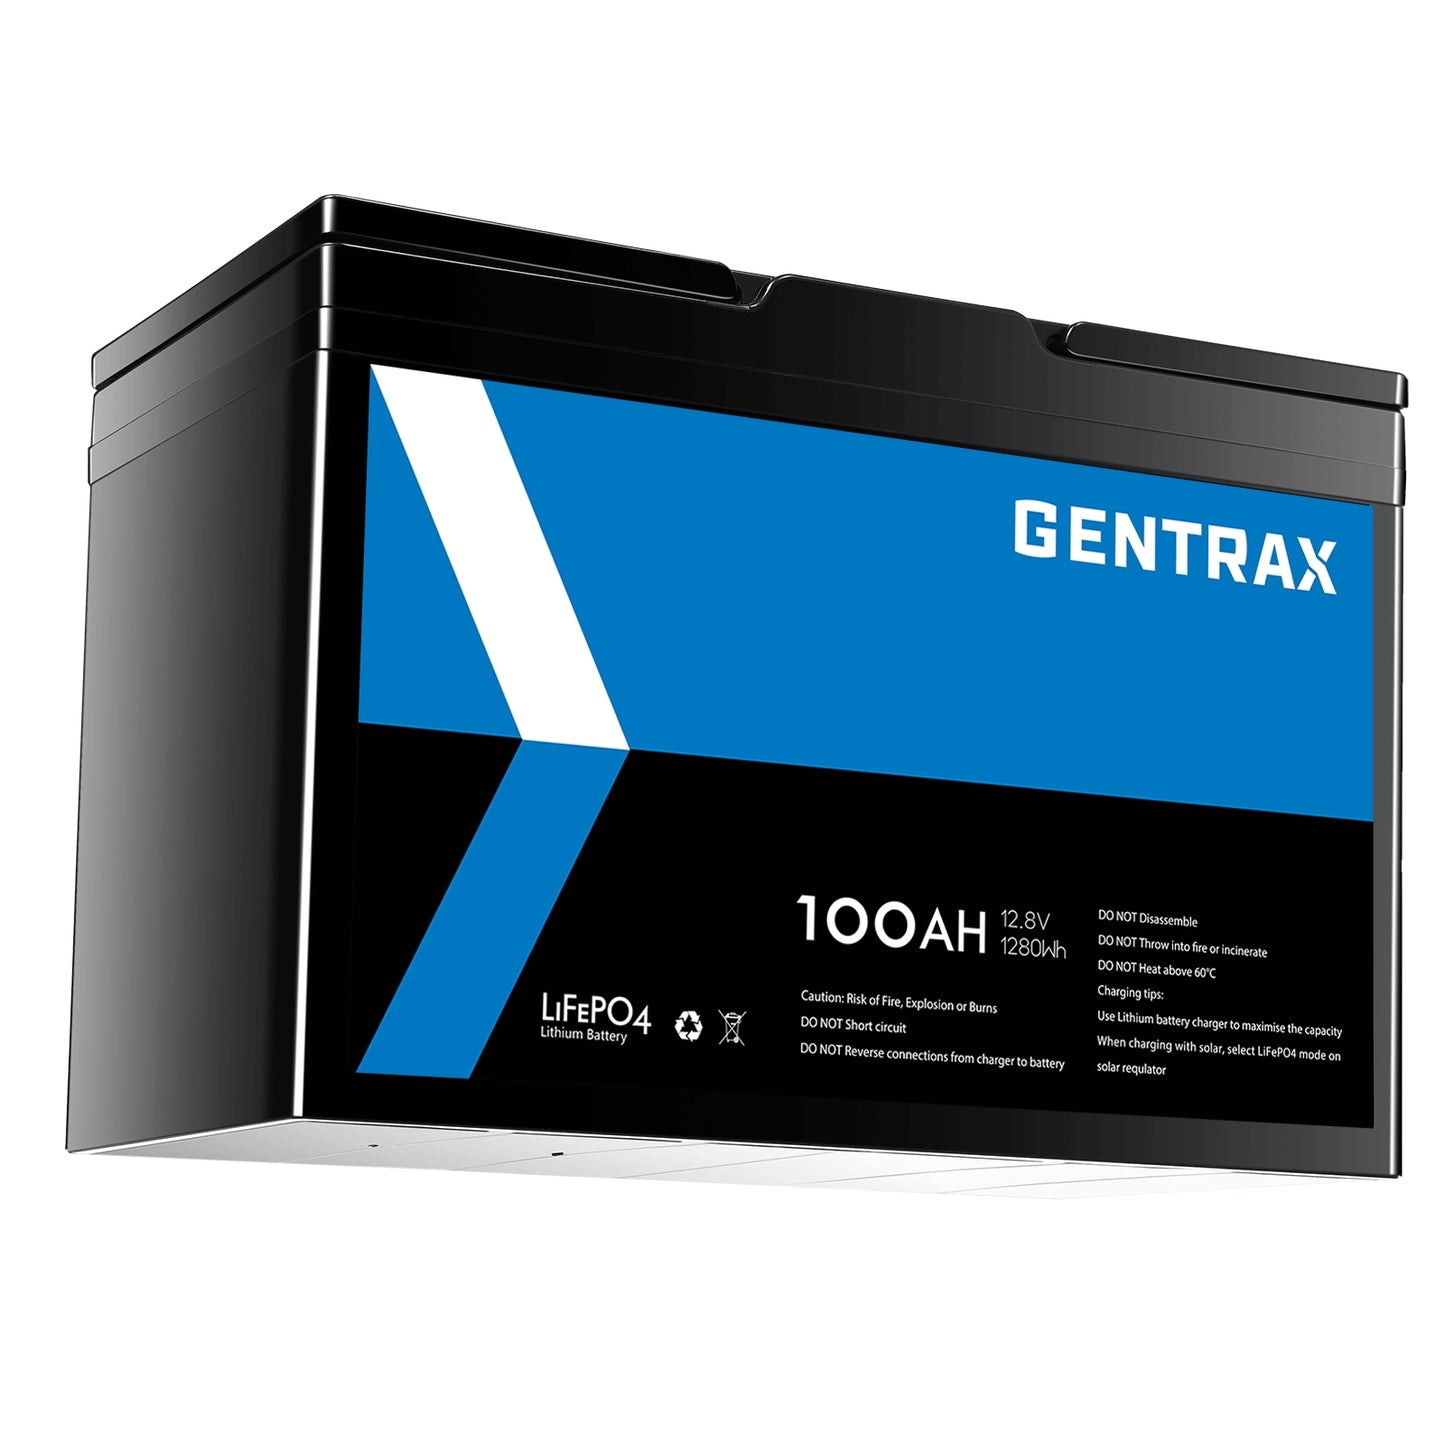 Gentrax 12V 100Ah Lithium Iron Phosphate Battery LiFePO4 Rechargeable